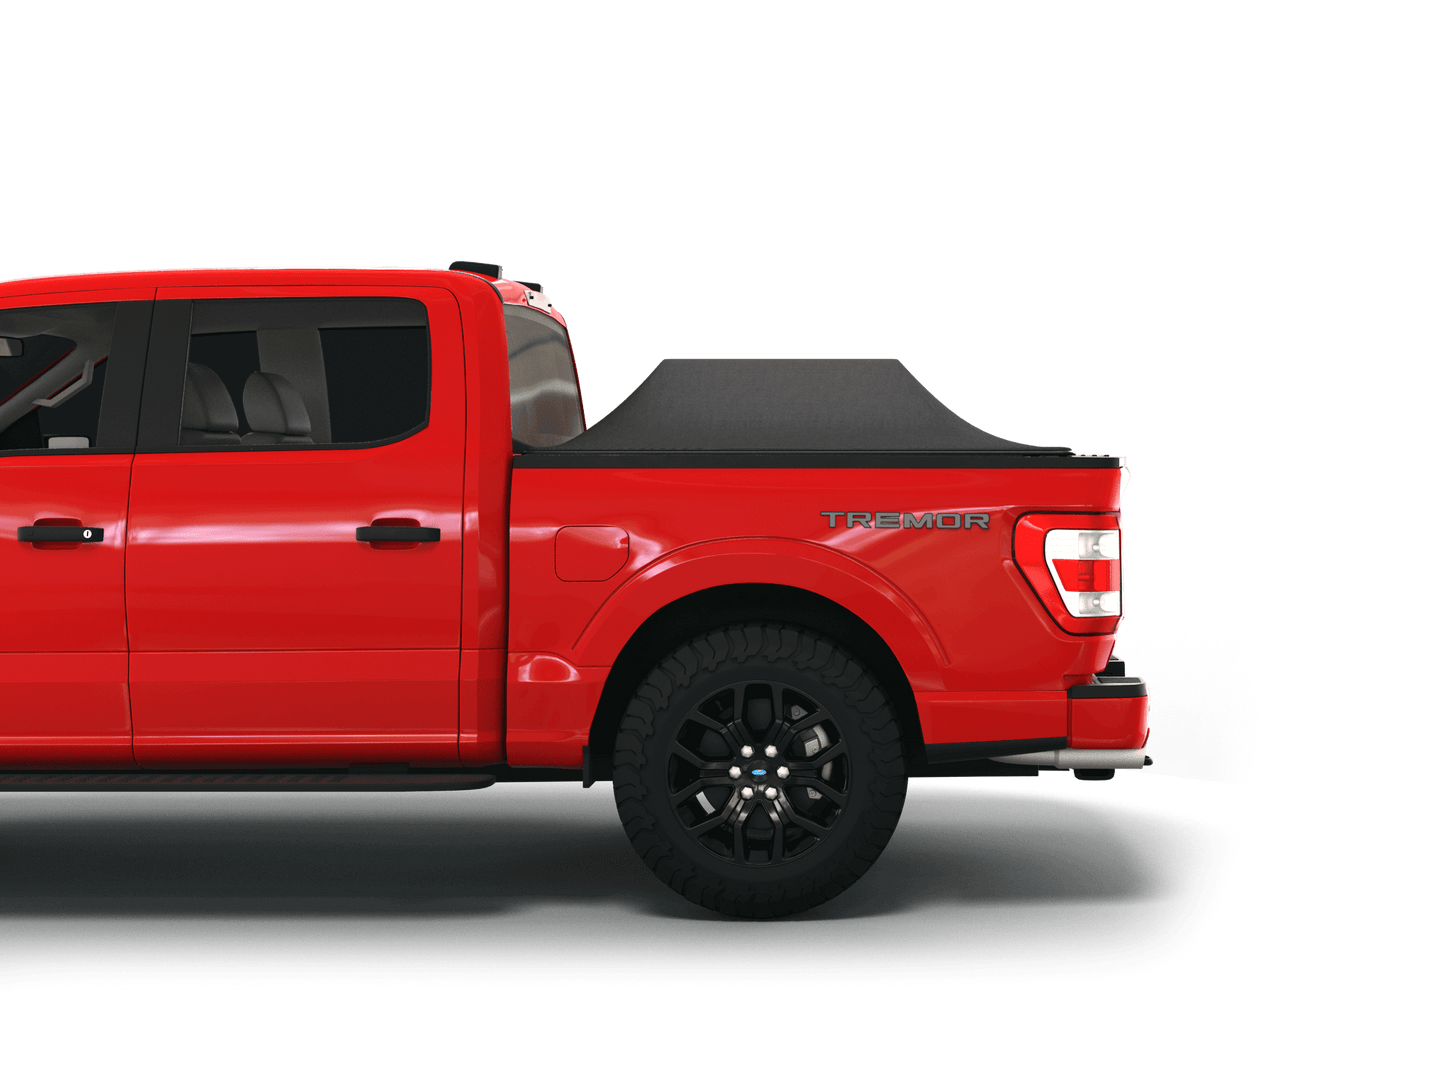 Red Ford F-150 with Sawtooth Stretch tonneau cover expanded over cargo load